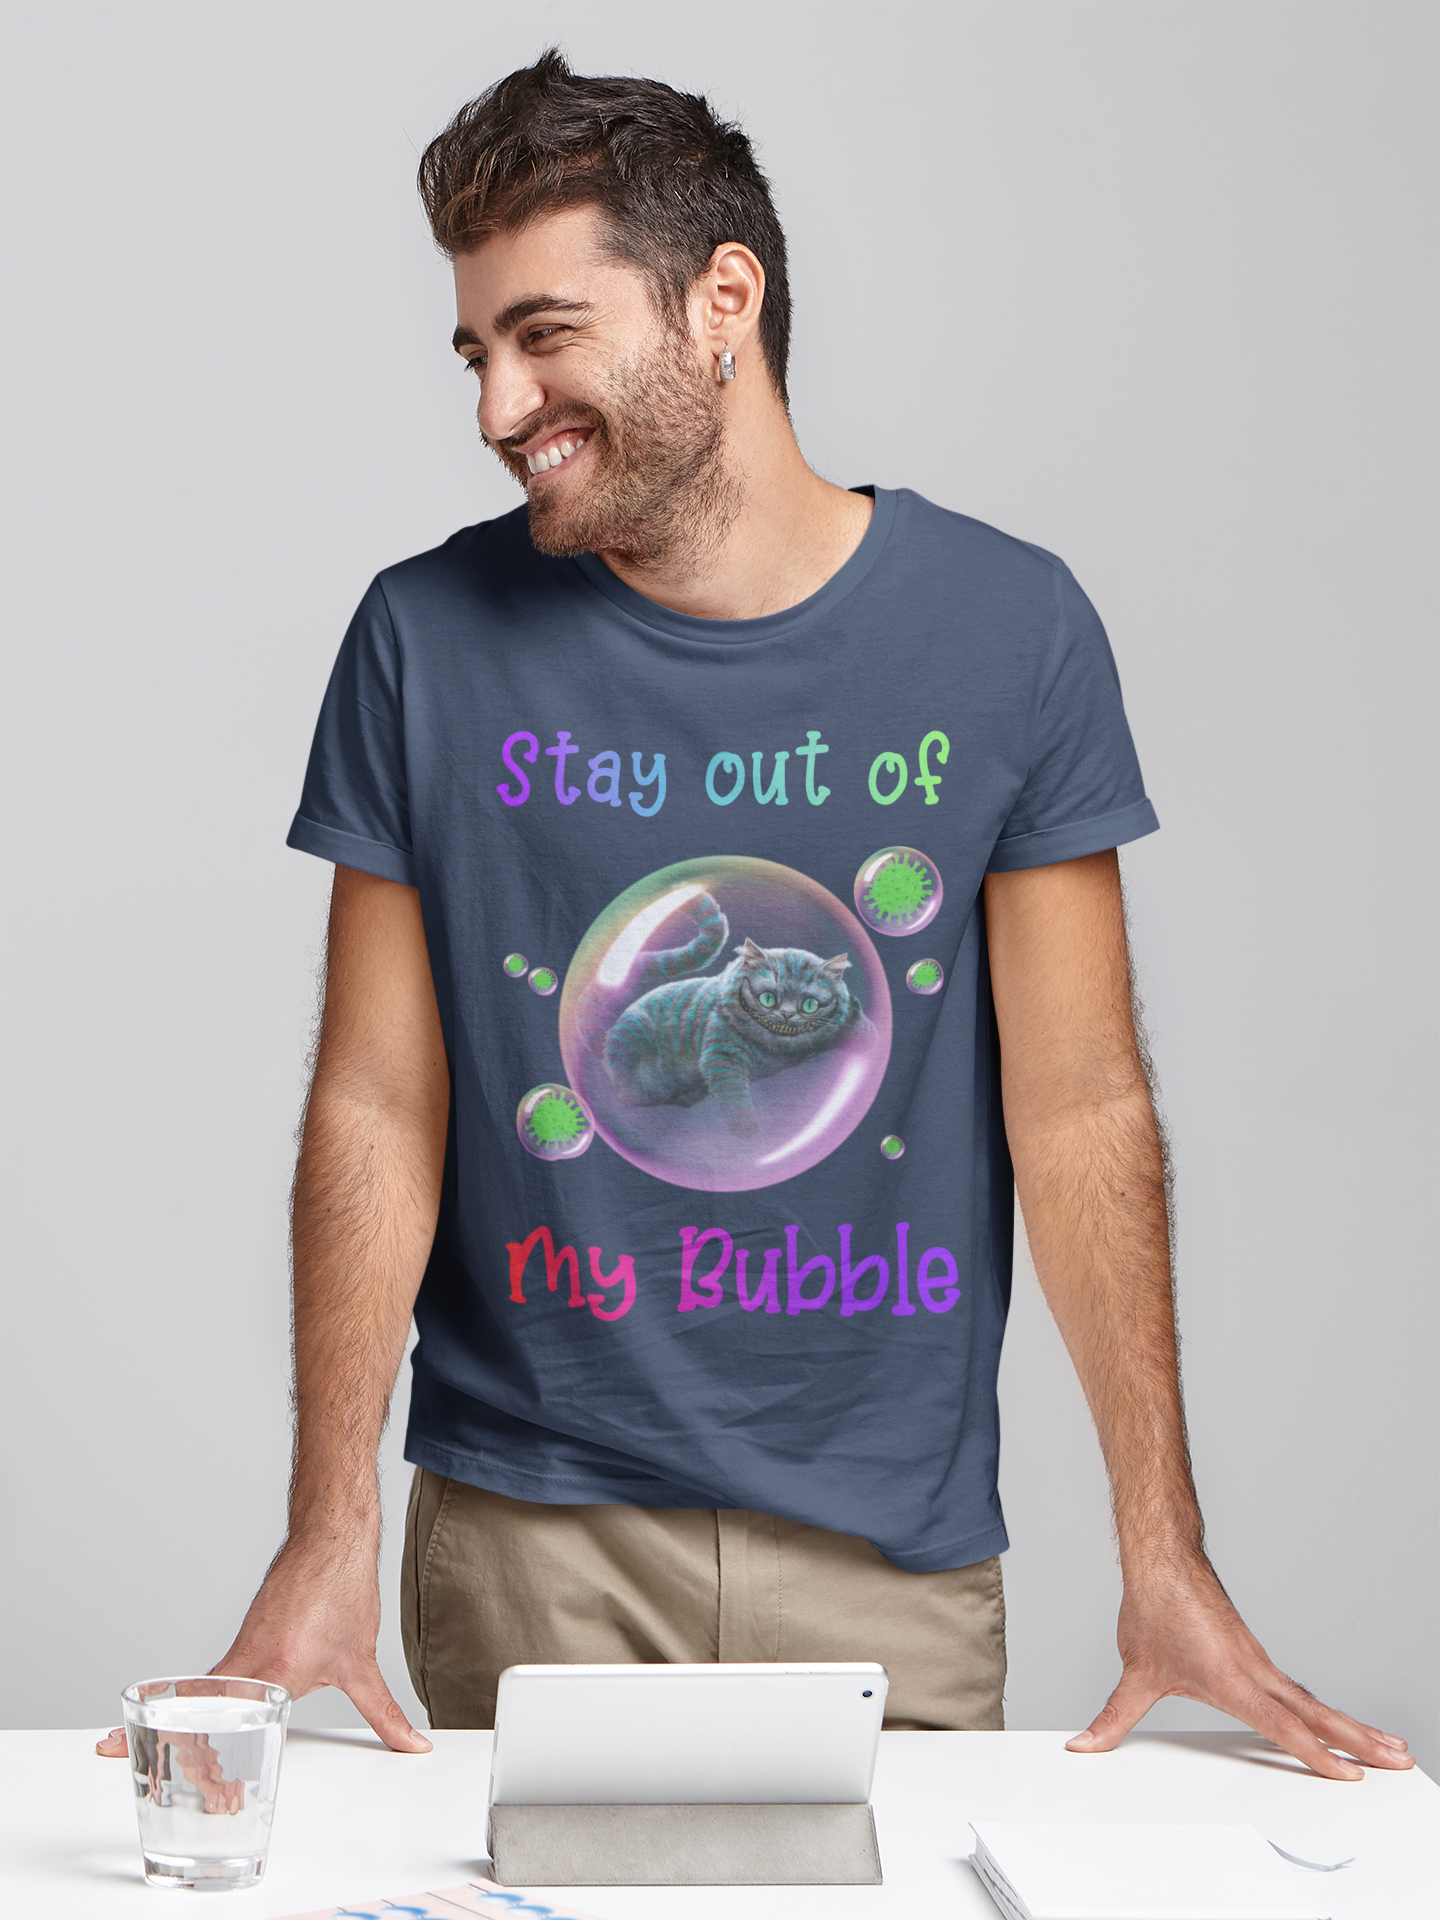 Disney Alice In Wonderland T Shirt, Cheshire Cat T Shirt, Stay Out Of My Bubble Tshirt